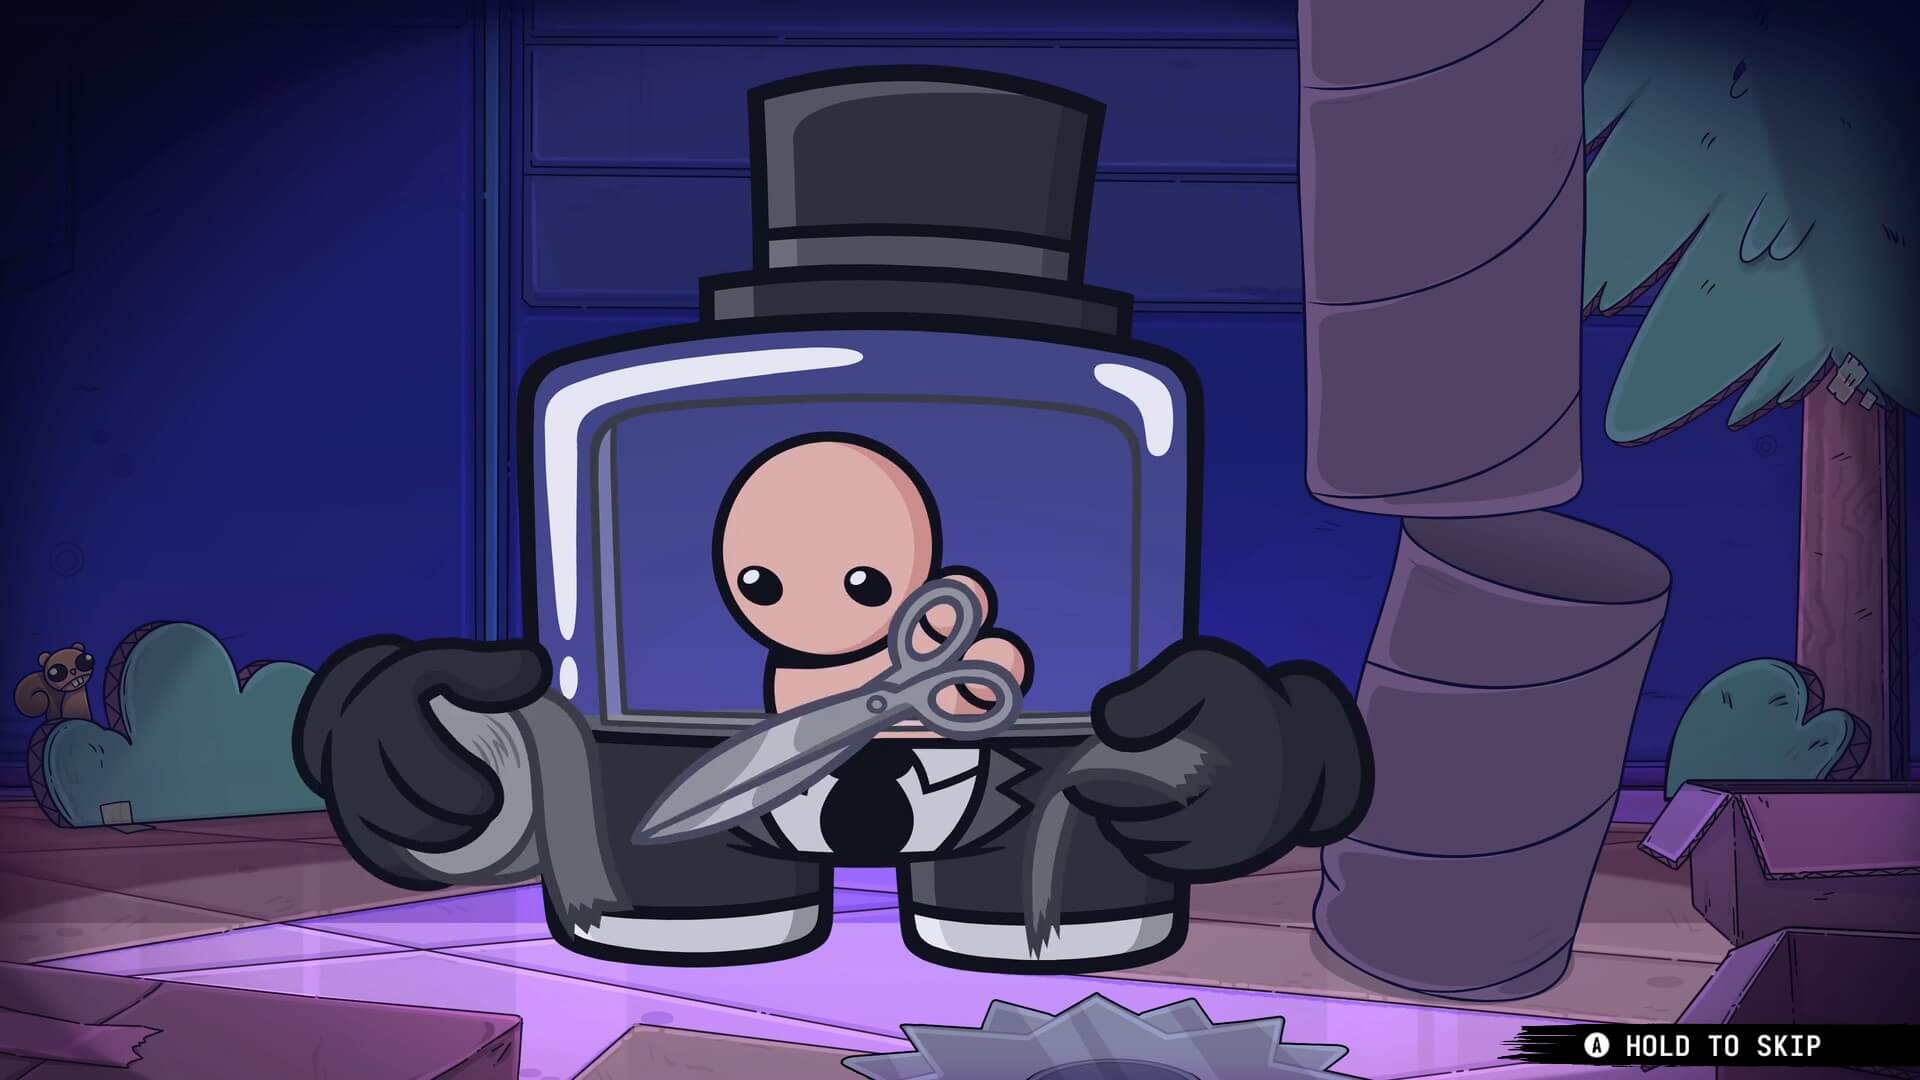 Dr. Fetus is making some sort of contraption for the game. He usually remains in his jar body but requires his real hands to cut the tape. the background seems to be made out of cardboard products.